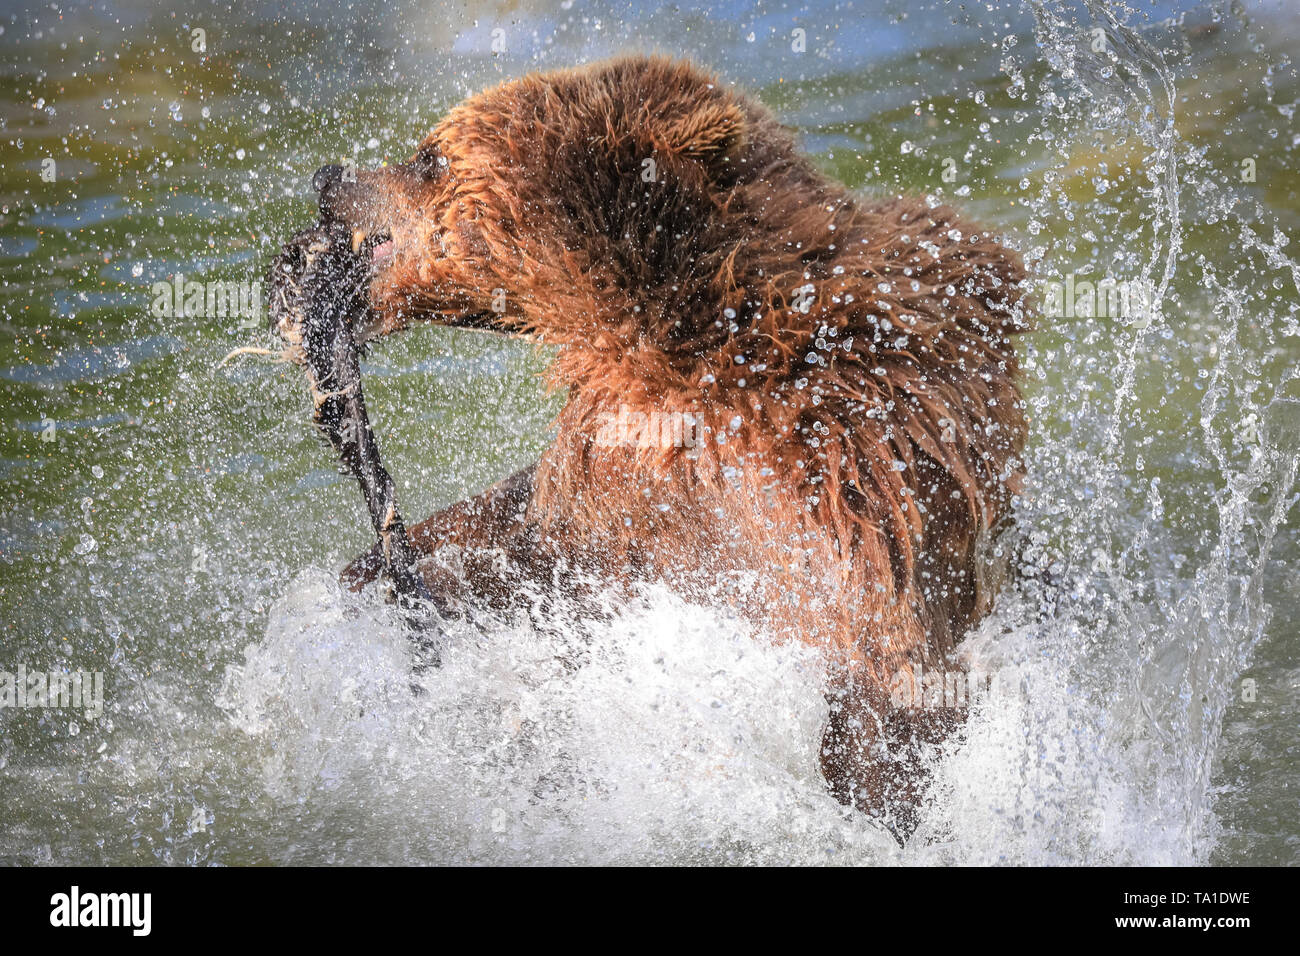 Whipsnade, UK, 21st May 2019. Eurasian brown bear lady 'Cinderella', one of three female brown bears resident at ZSL Whipsnade Zoo, has lots of fun splashing about with enrichment balls, coconuts and a rag and animal skin in the enclosure's pool whilst enjoying the warm afternoon sunshine in the South East. Credit: Imageplotter/Alamy Live News Stock Photo